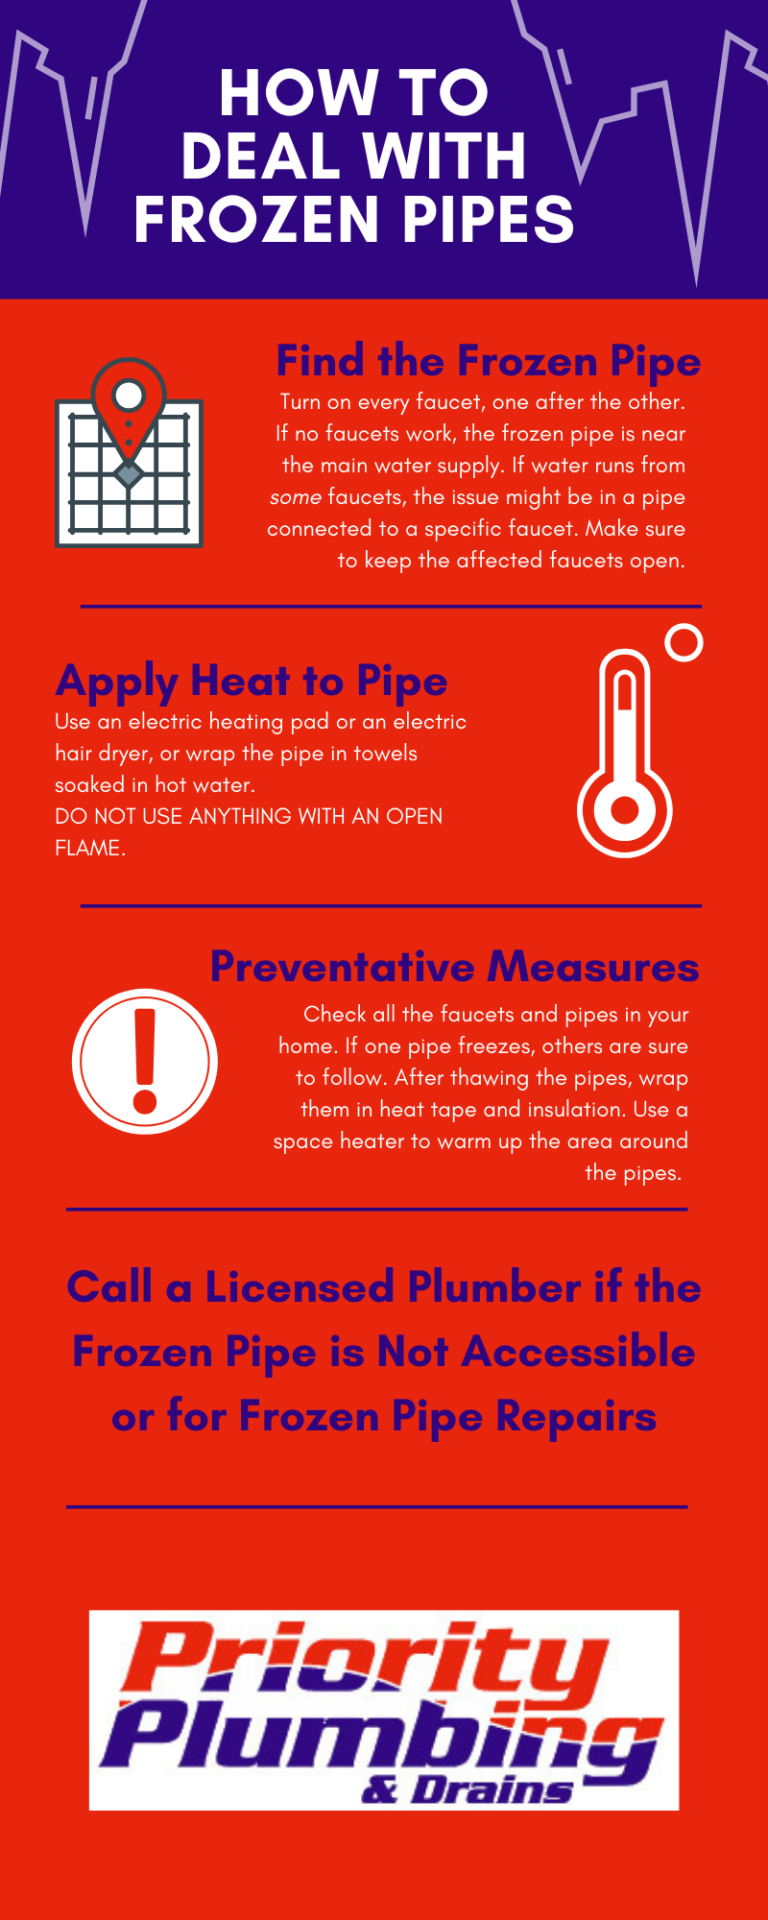 Priority Plumbing - How to Deal with Frozen Pipes